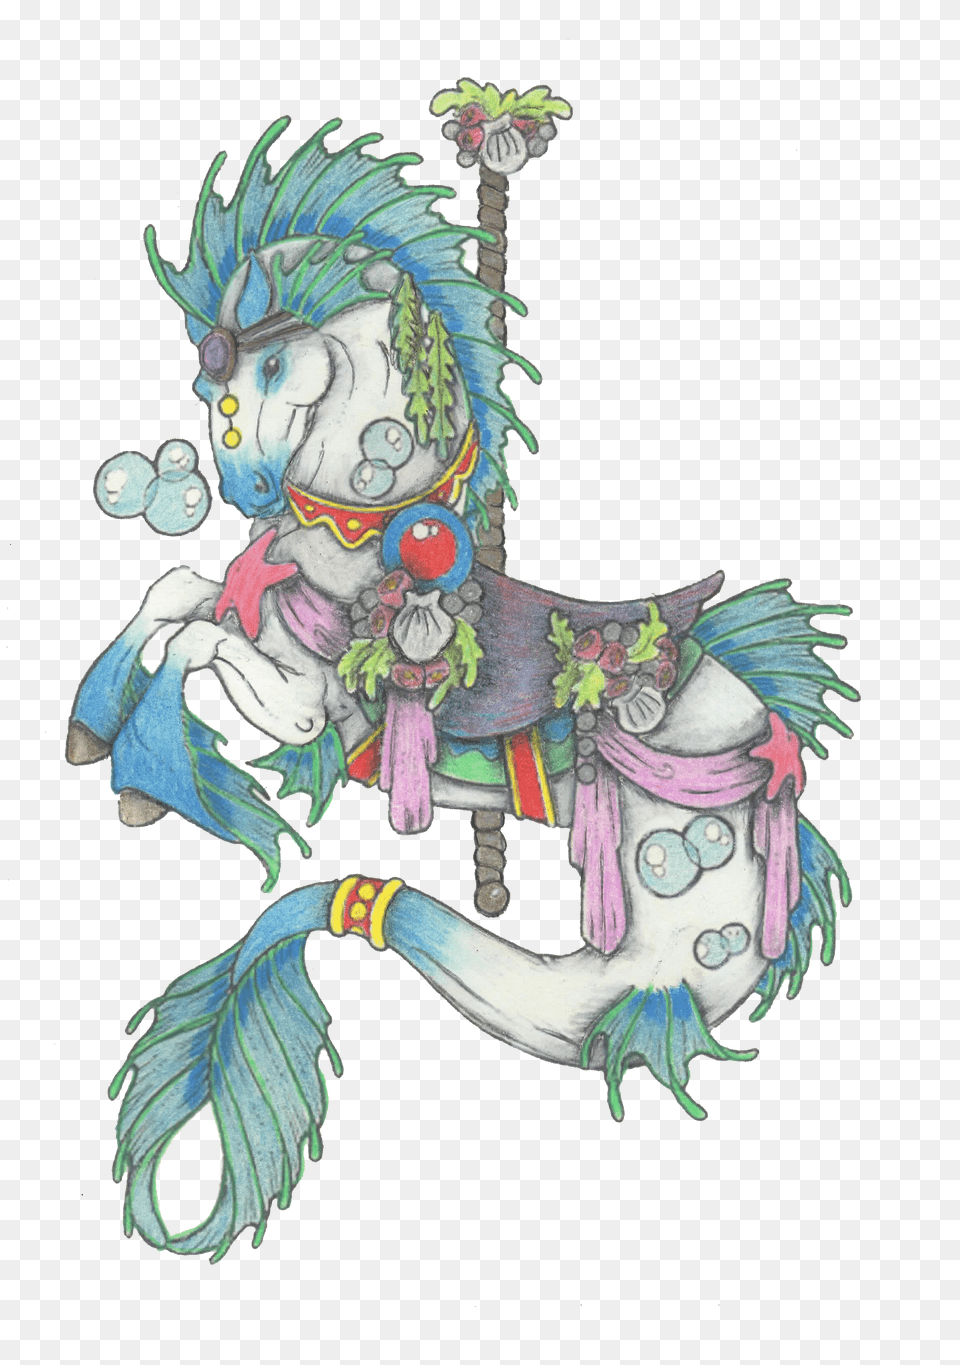 Carousel Horse Colored Pencil Carousel Colored Pencil Drawings Carosel Horses Free Transparent Png